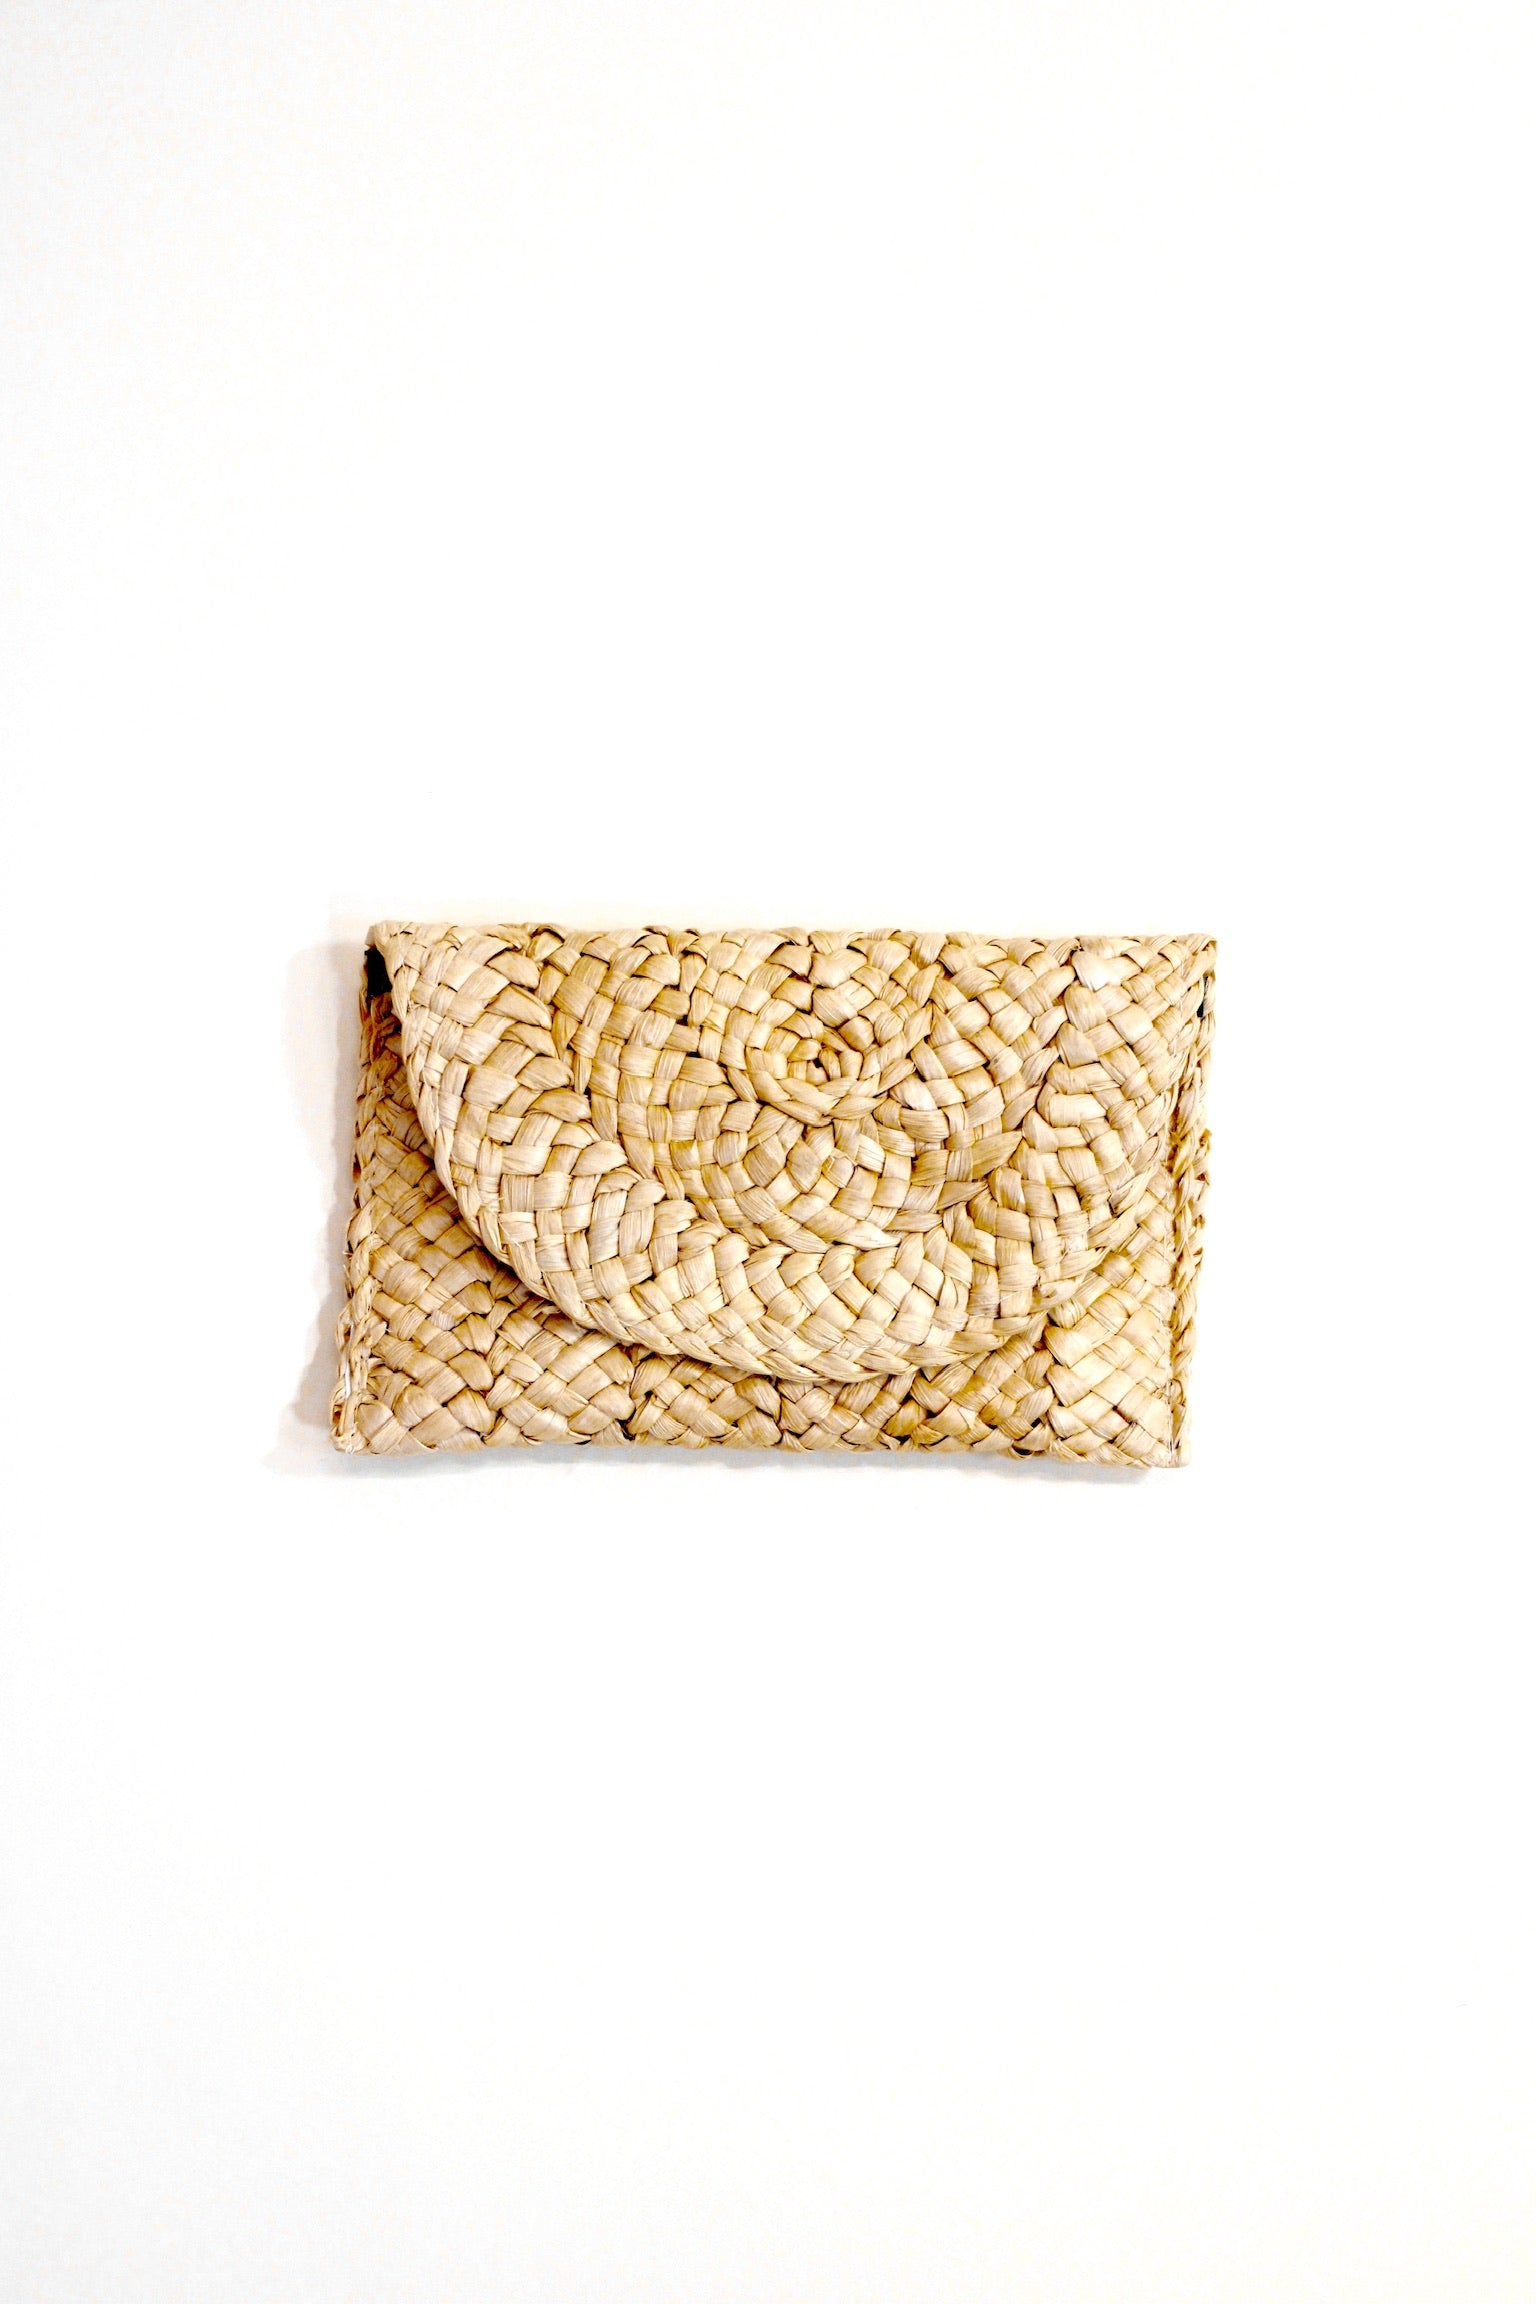 Natural Handmade Straw Clutch Rattan Bag | Collective Request 